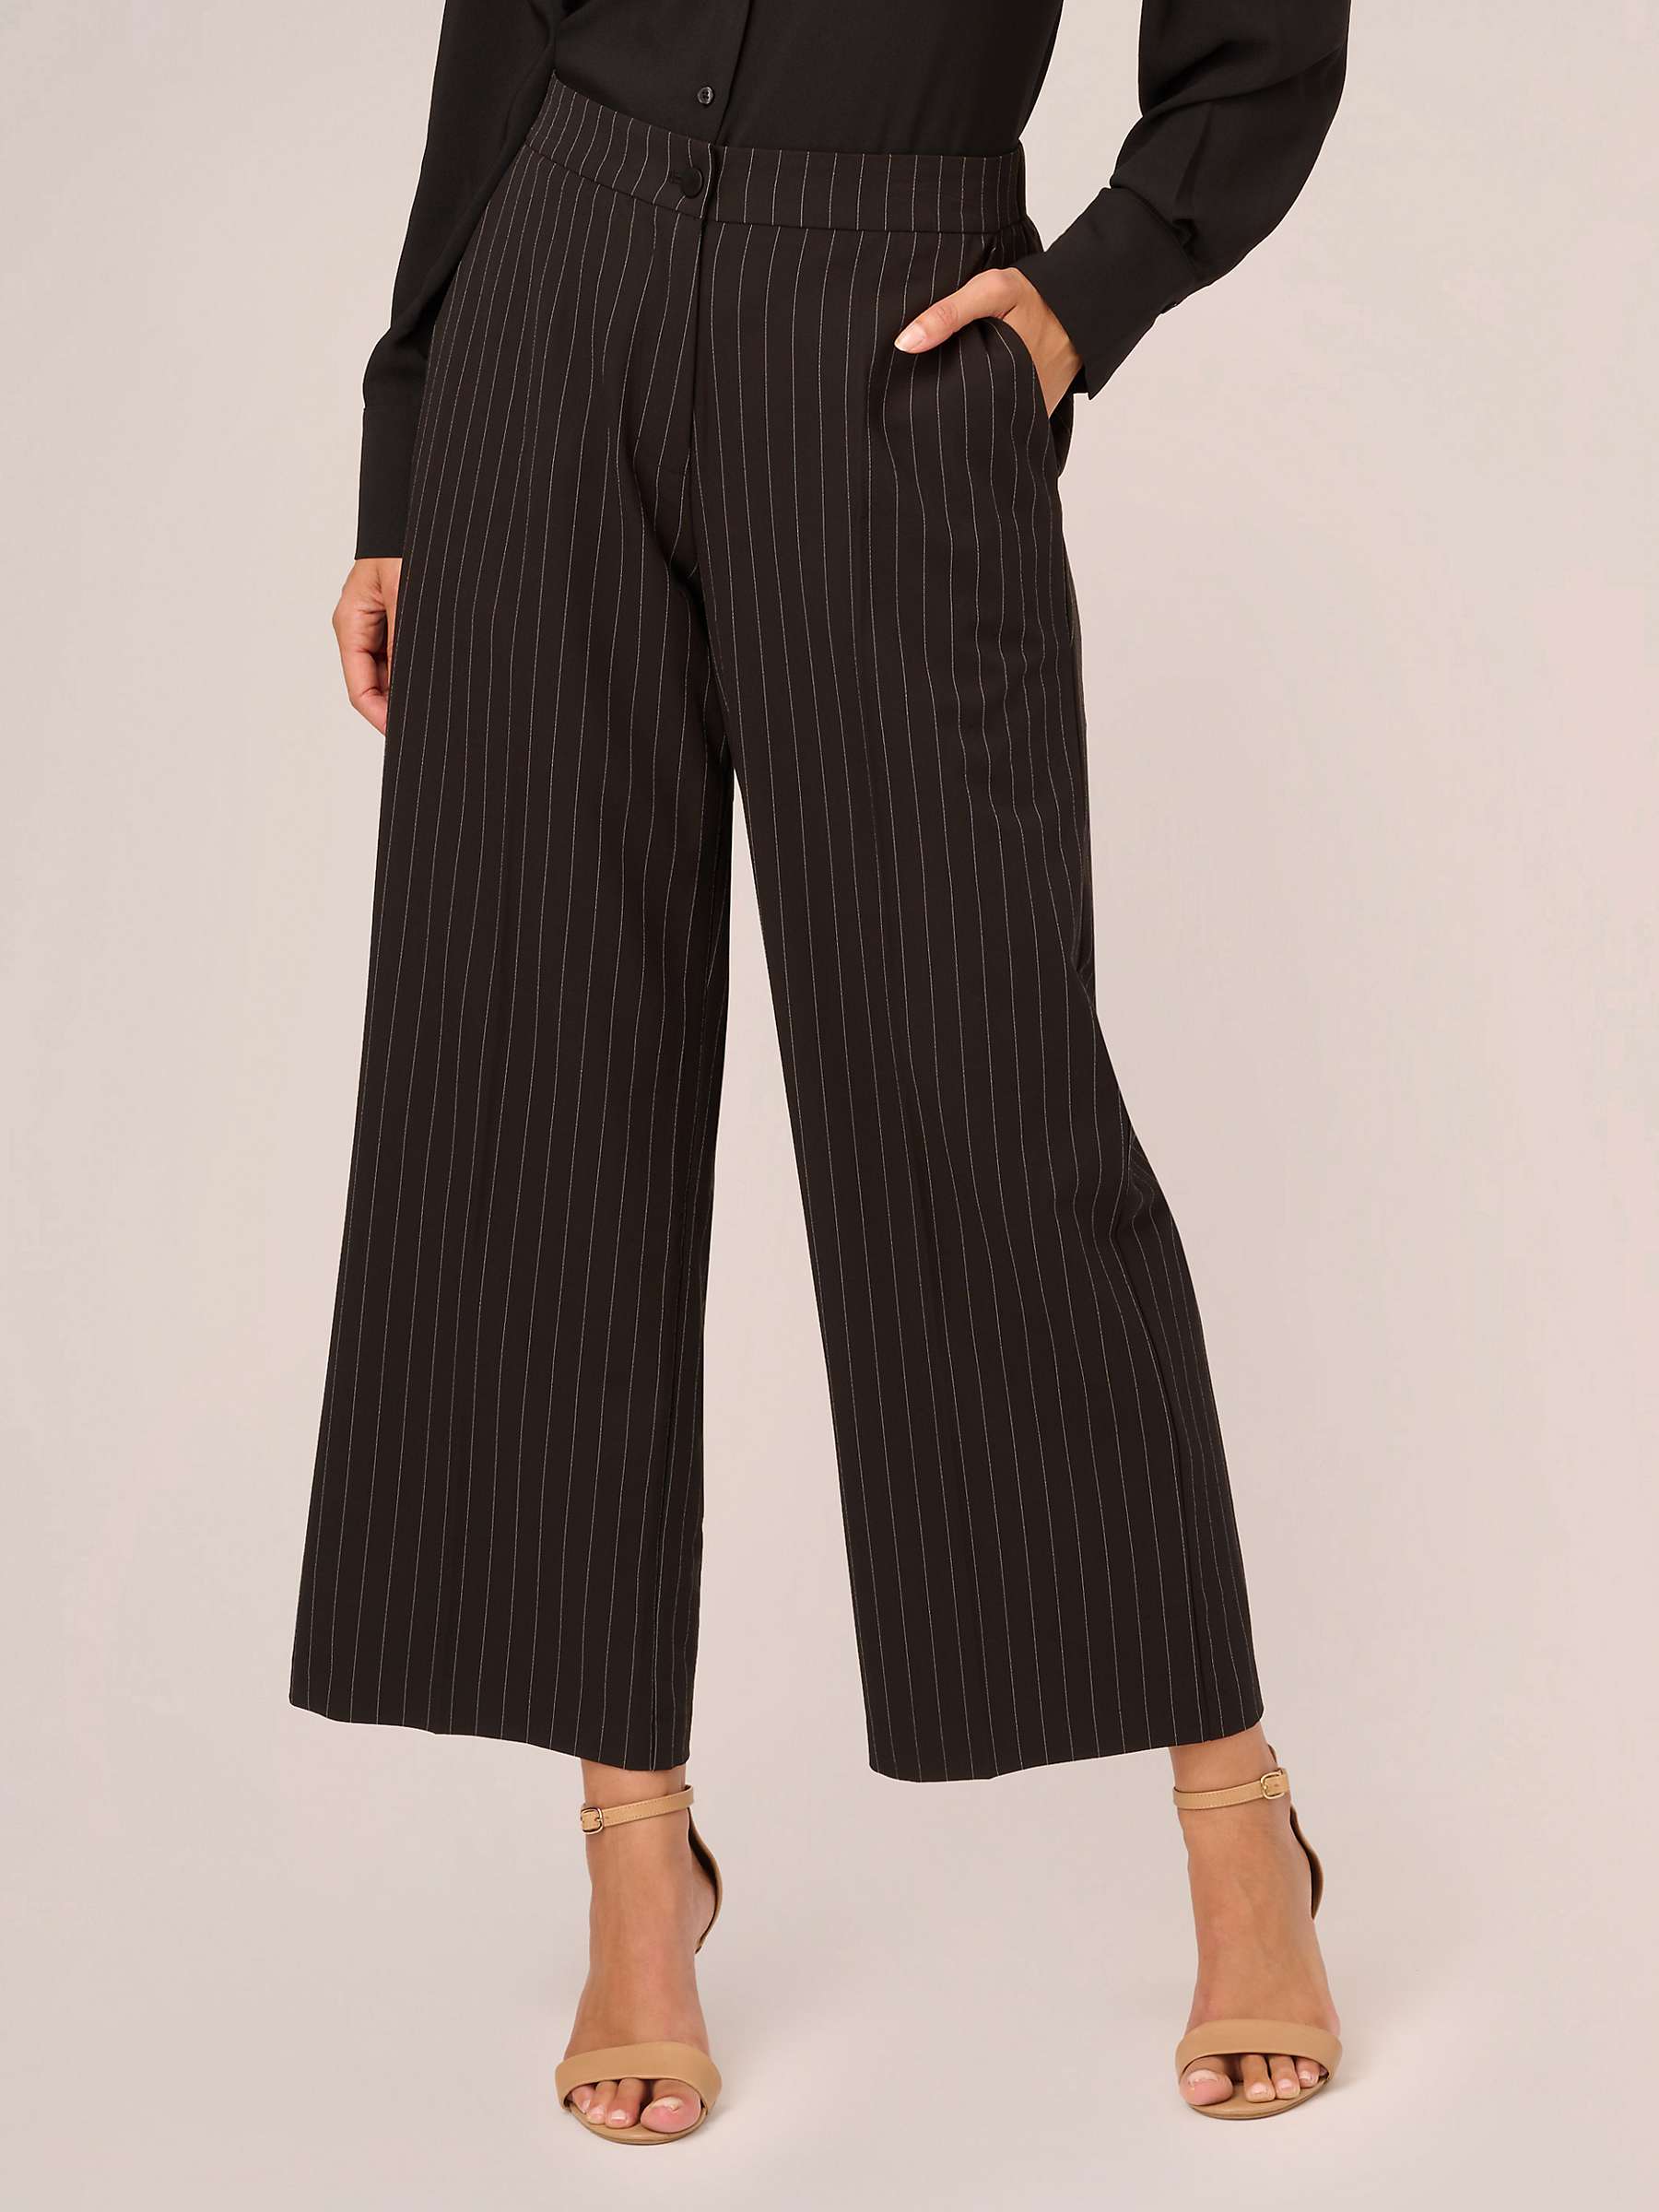 Buy Adrianna Papell Pin Stripe Cropped Wide Leg Trousers, Black Online at johnlewis.com